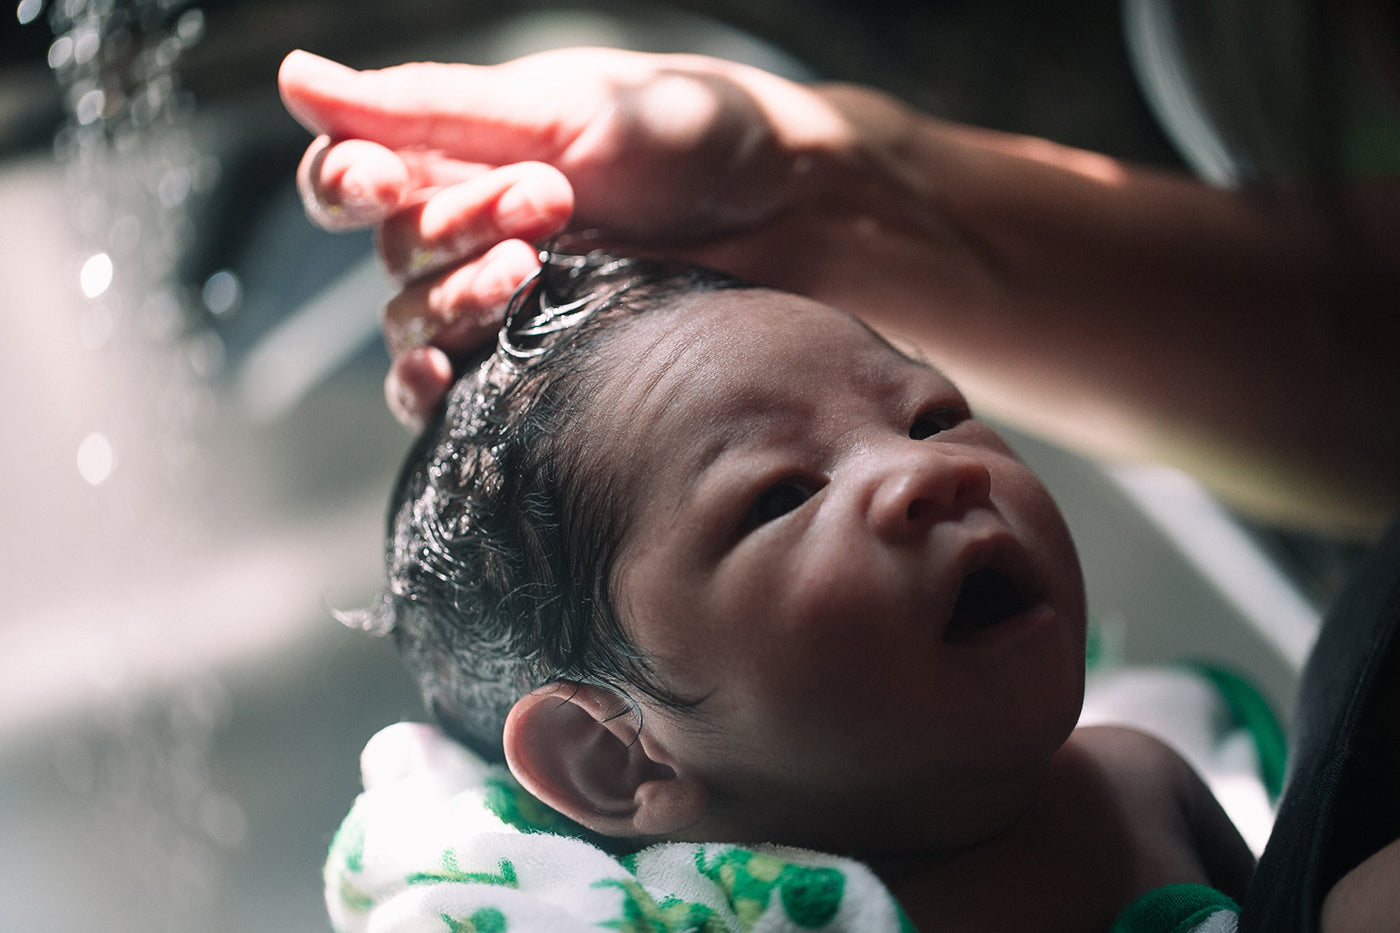 Coconut Oil dandruff and dry, Itchy scalp - Best for Diaper Rash